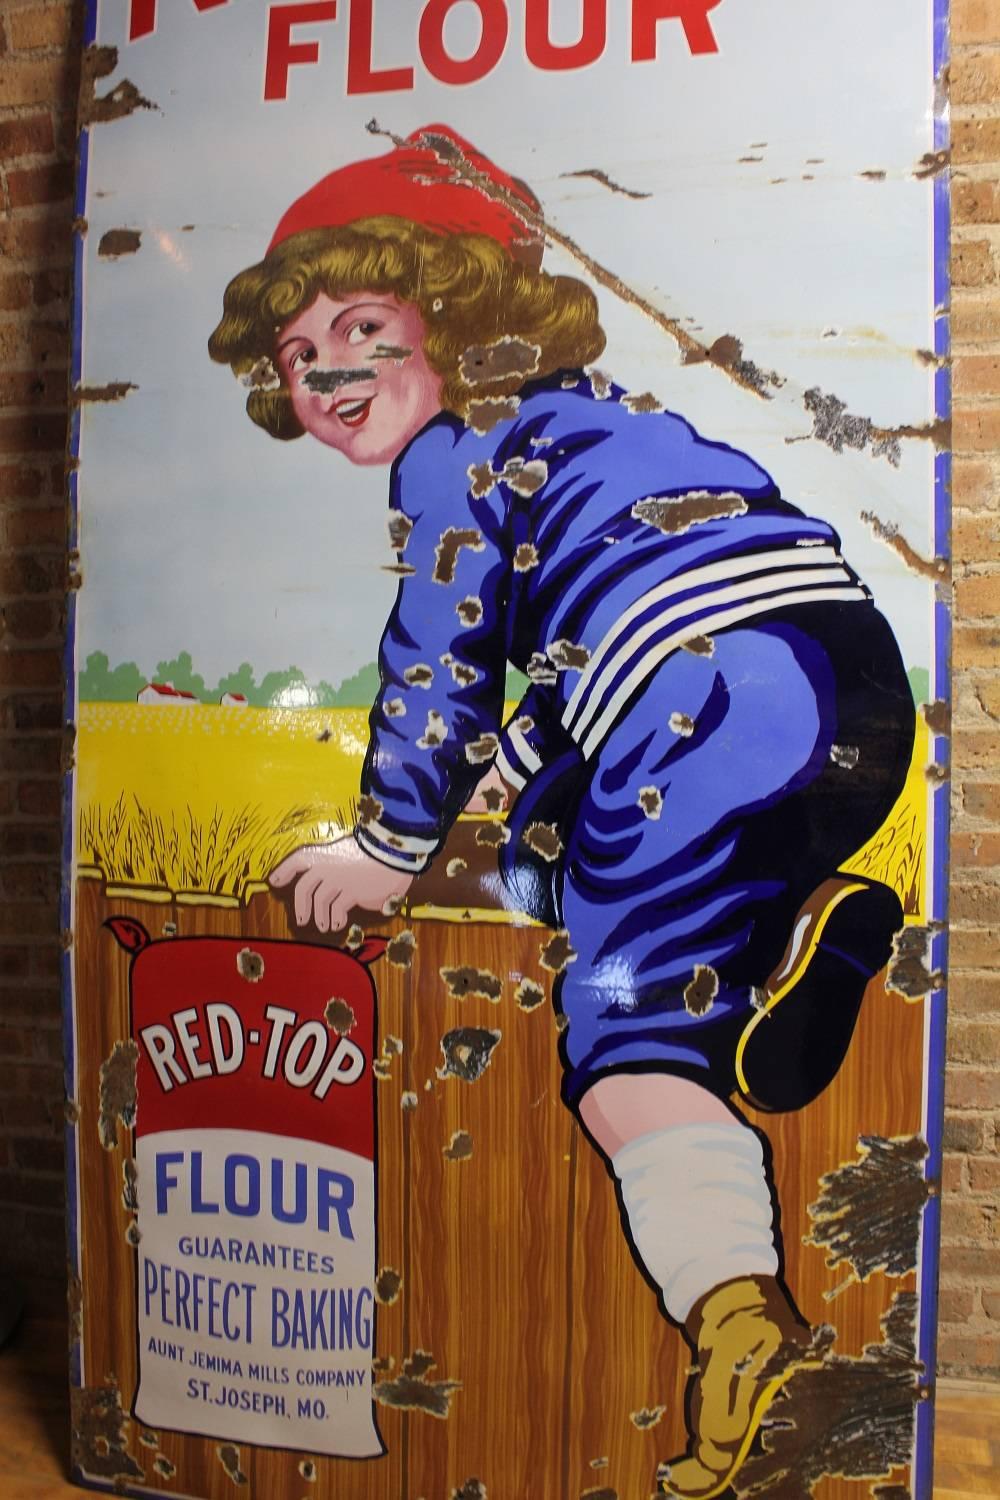 8' tall rare antique porcelain advertising sign for 